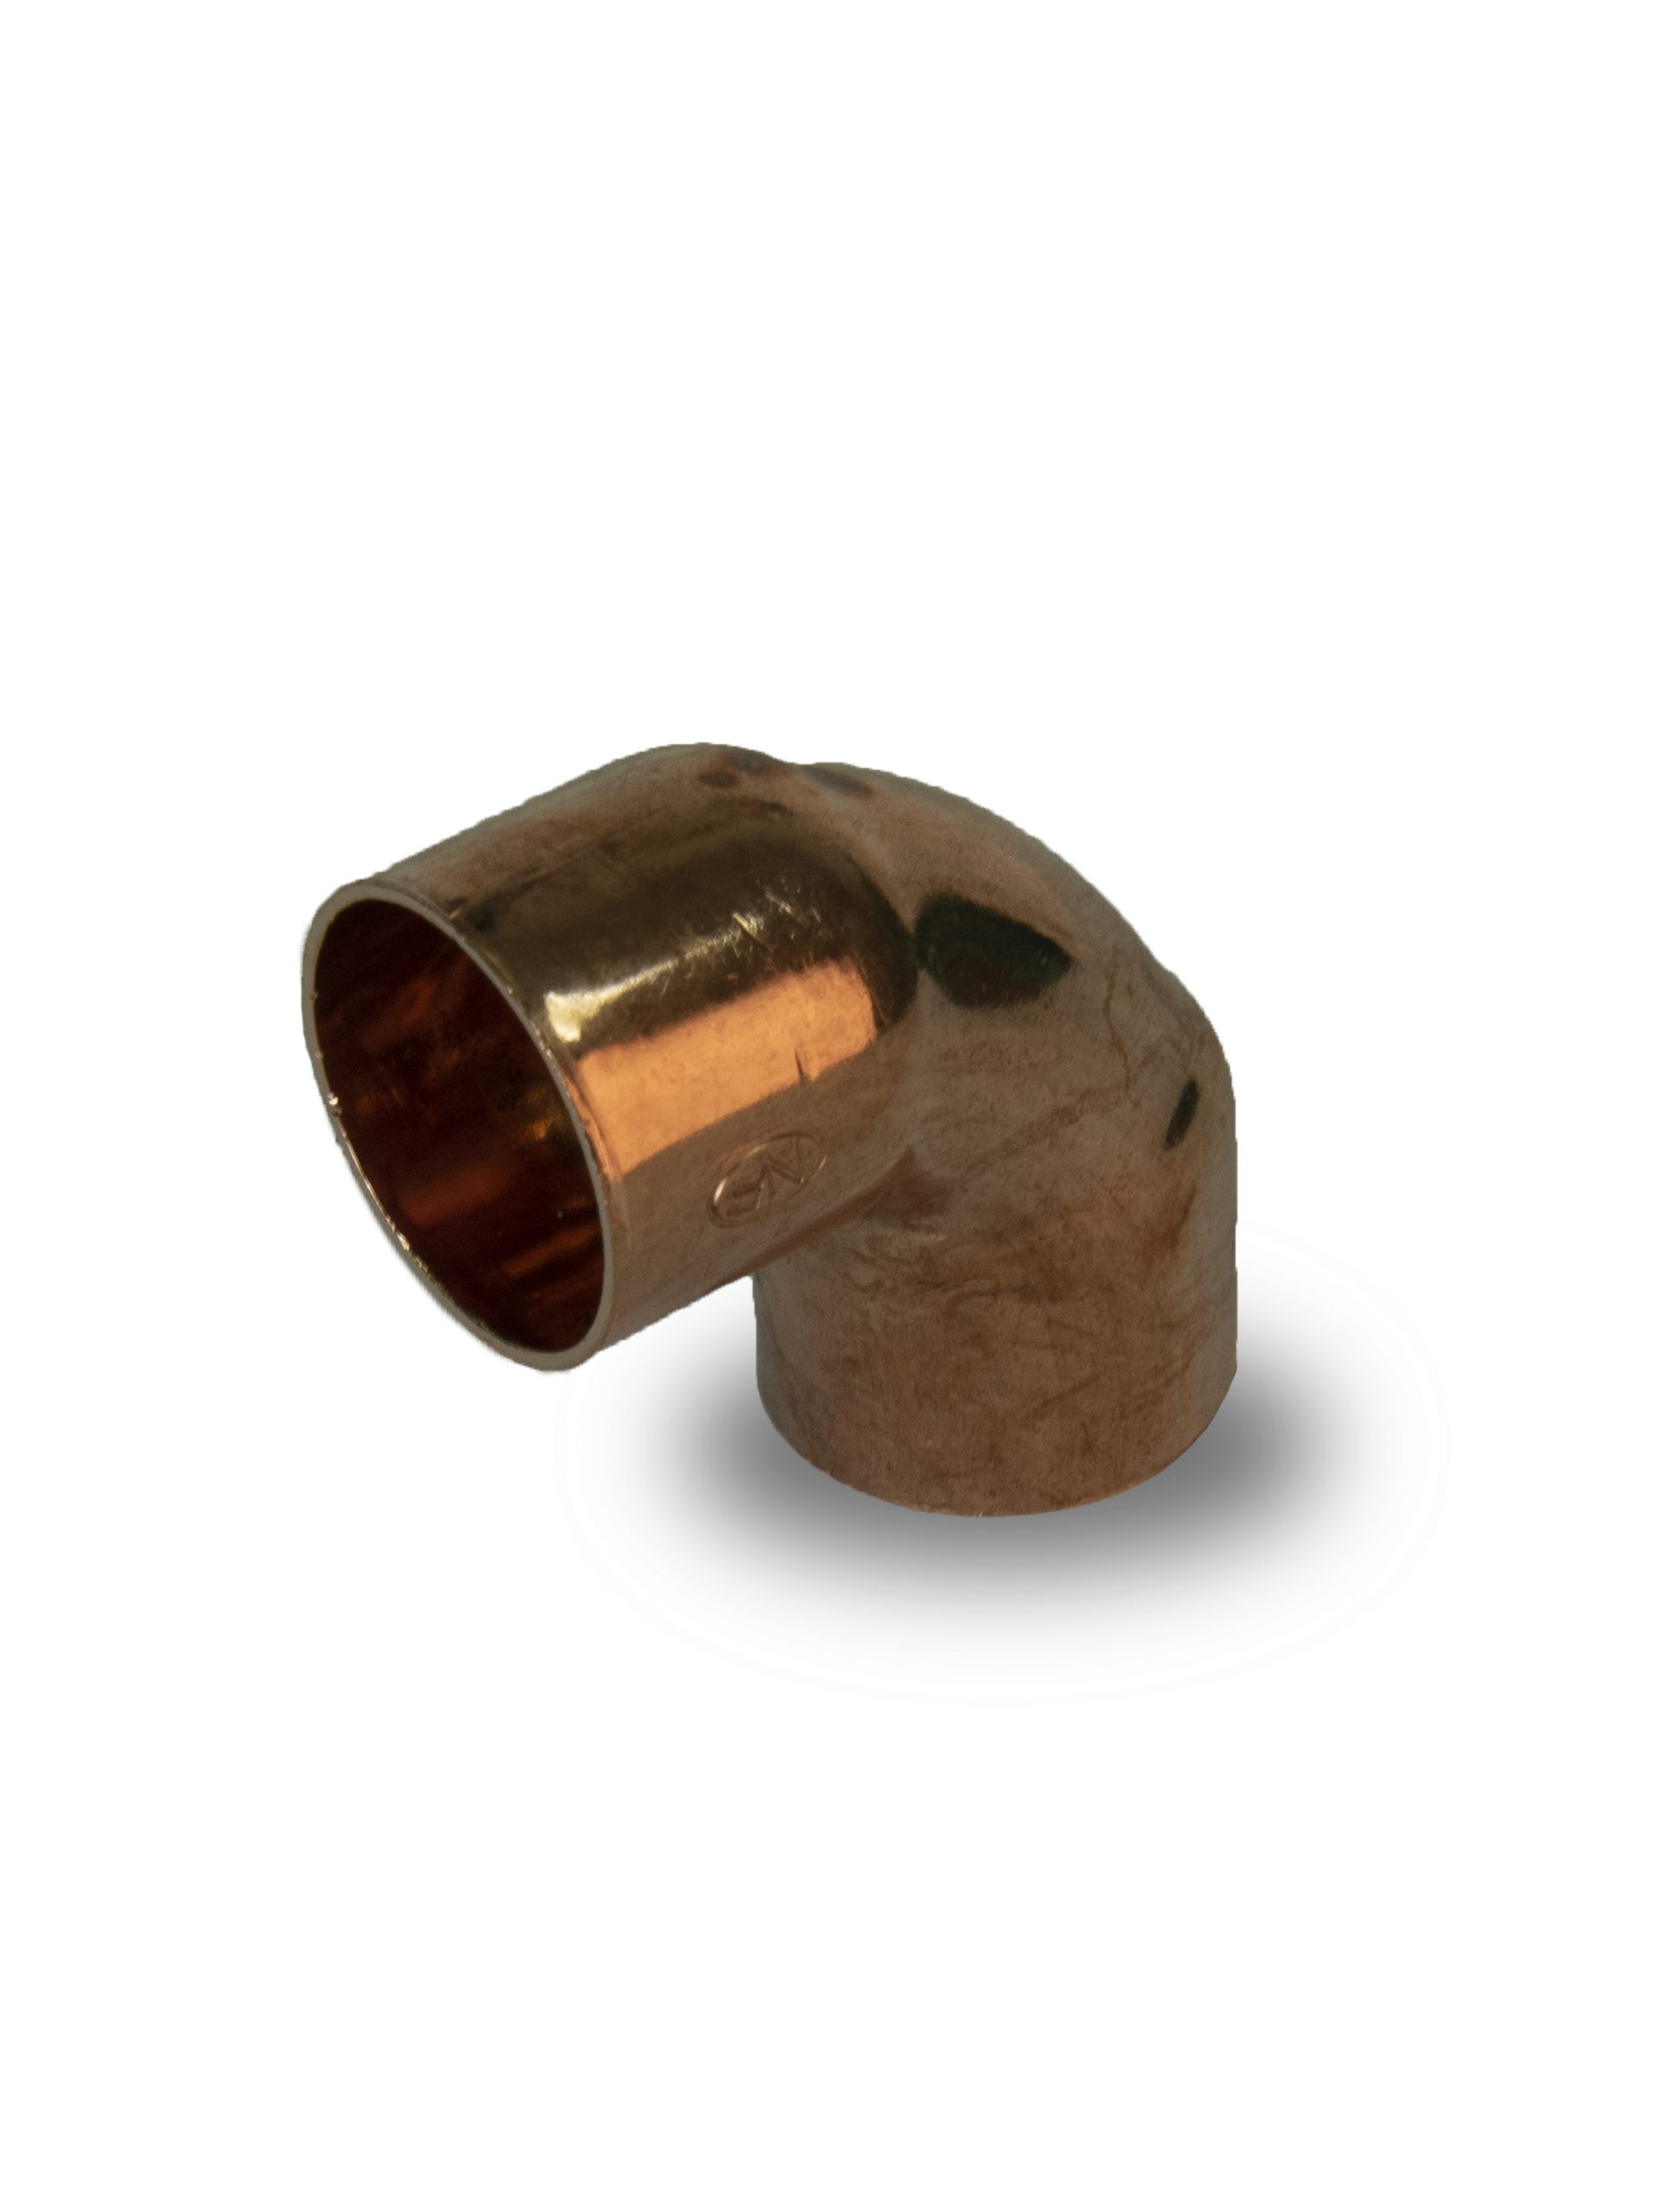 COPPER ELBOW 90 , 22MM , COMAP-CLESSE from Gas Equipment Company Llc Abu Dhabi, UNITED ARAB EMIRATES